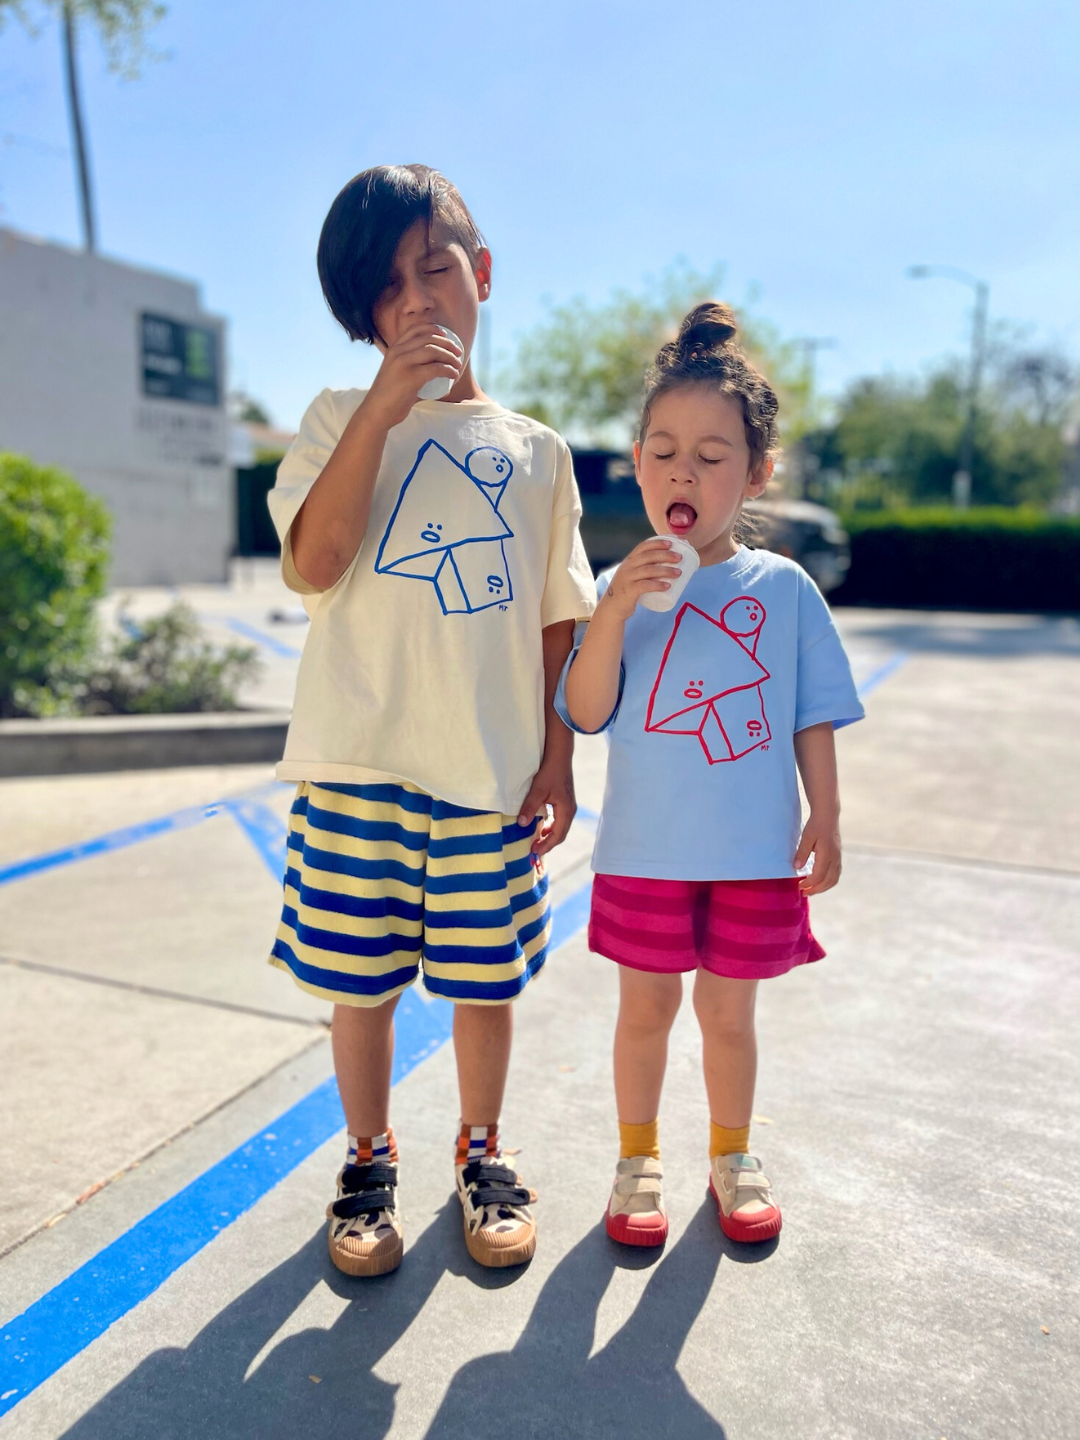 Two kids wearing the Jumble Tee, one in sky blue with red shapes outline with funny faces in the center, and one in the cream shirt with the same design in blue. The kids are wearing striped shirts and eating ice creams, standing in a parking lot with blue lines on the ground, and blue sky behind.